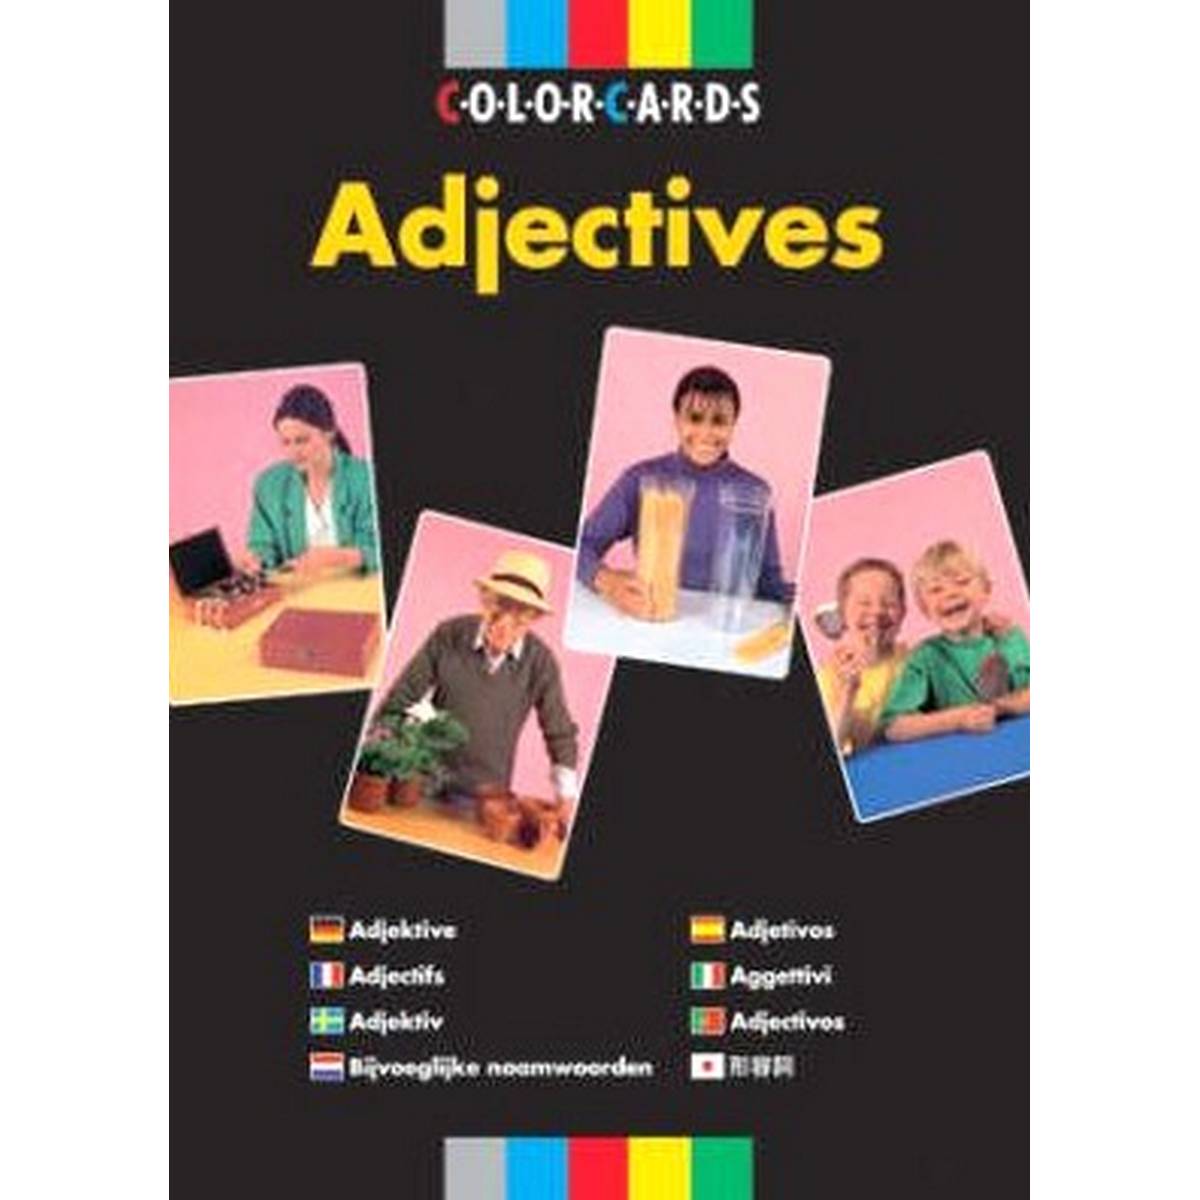 ColorCards: Adjectives